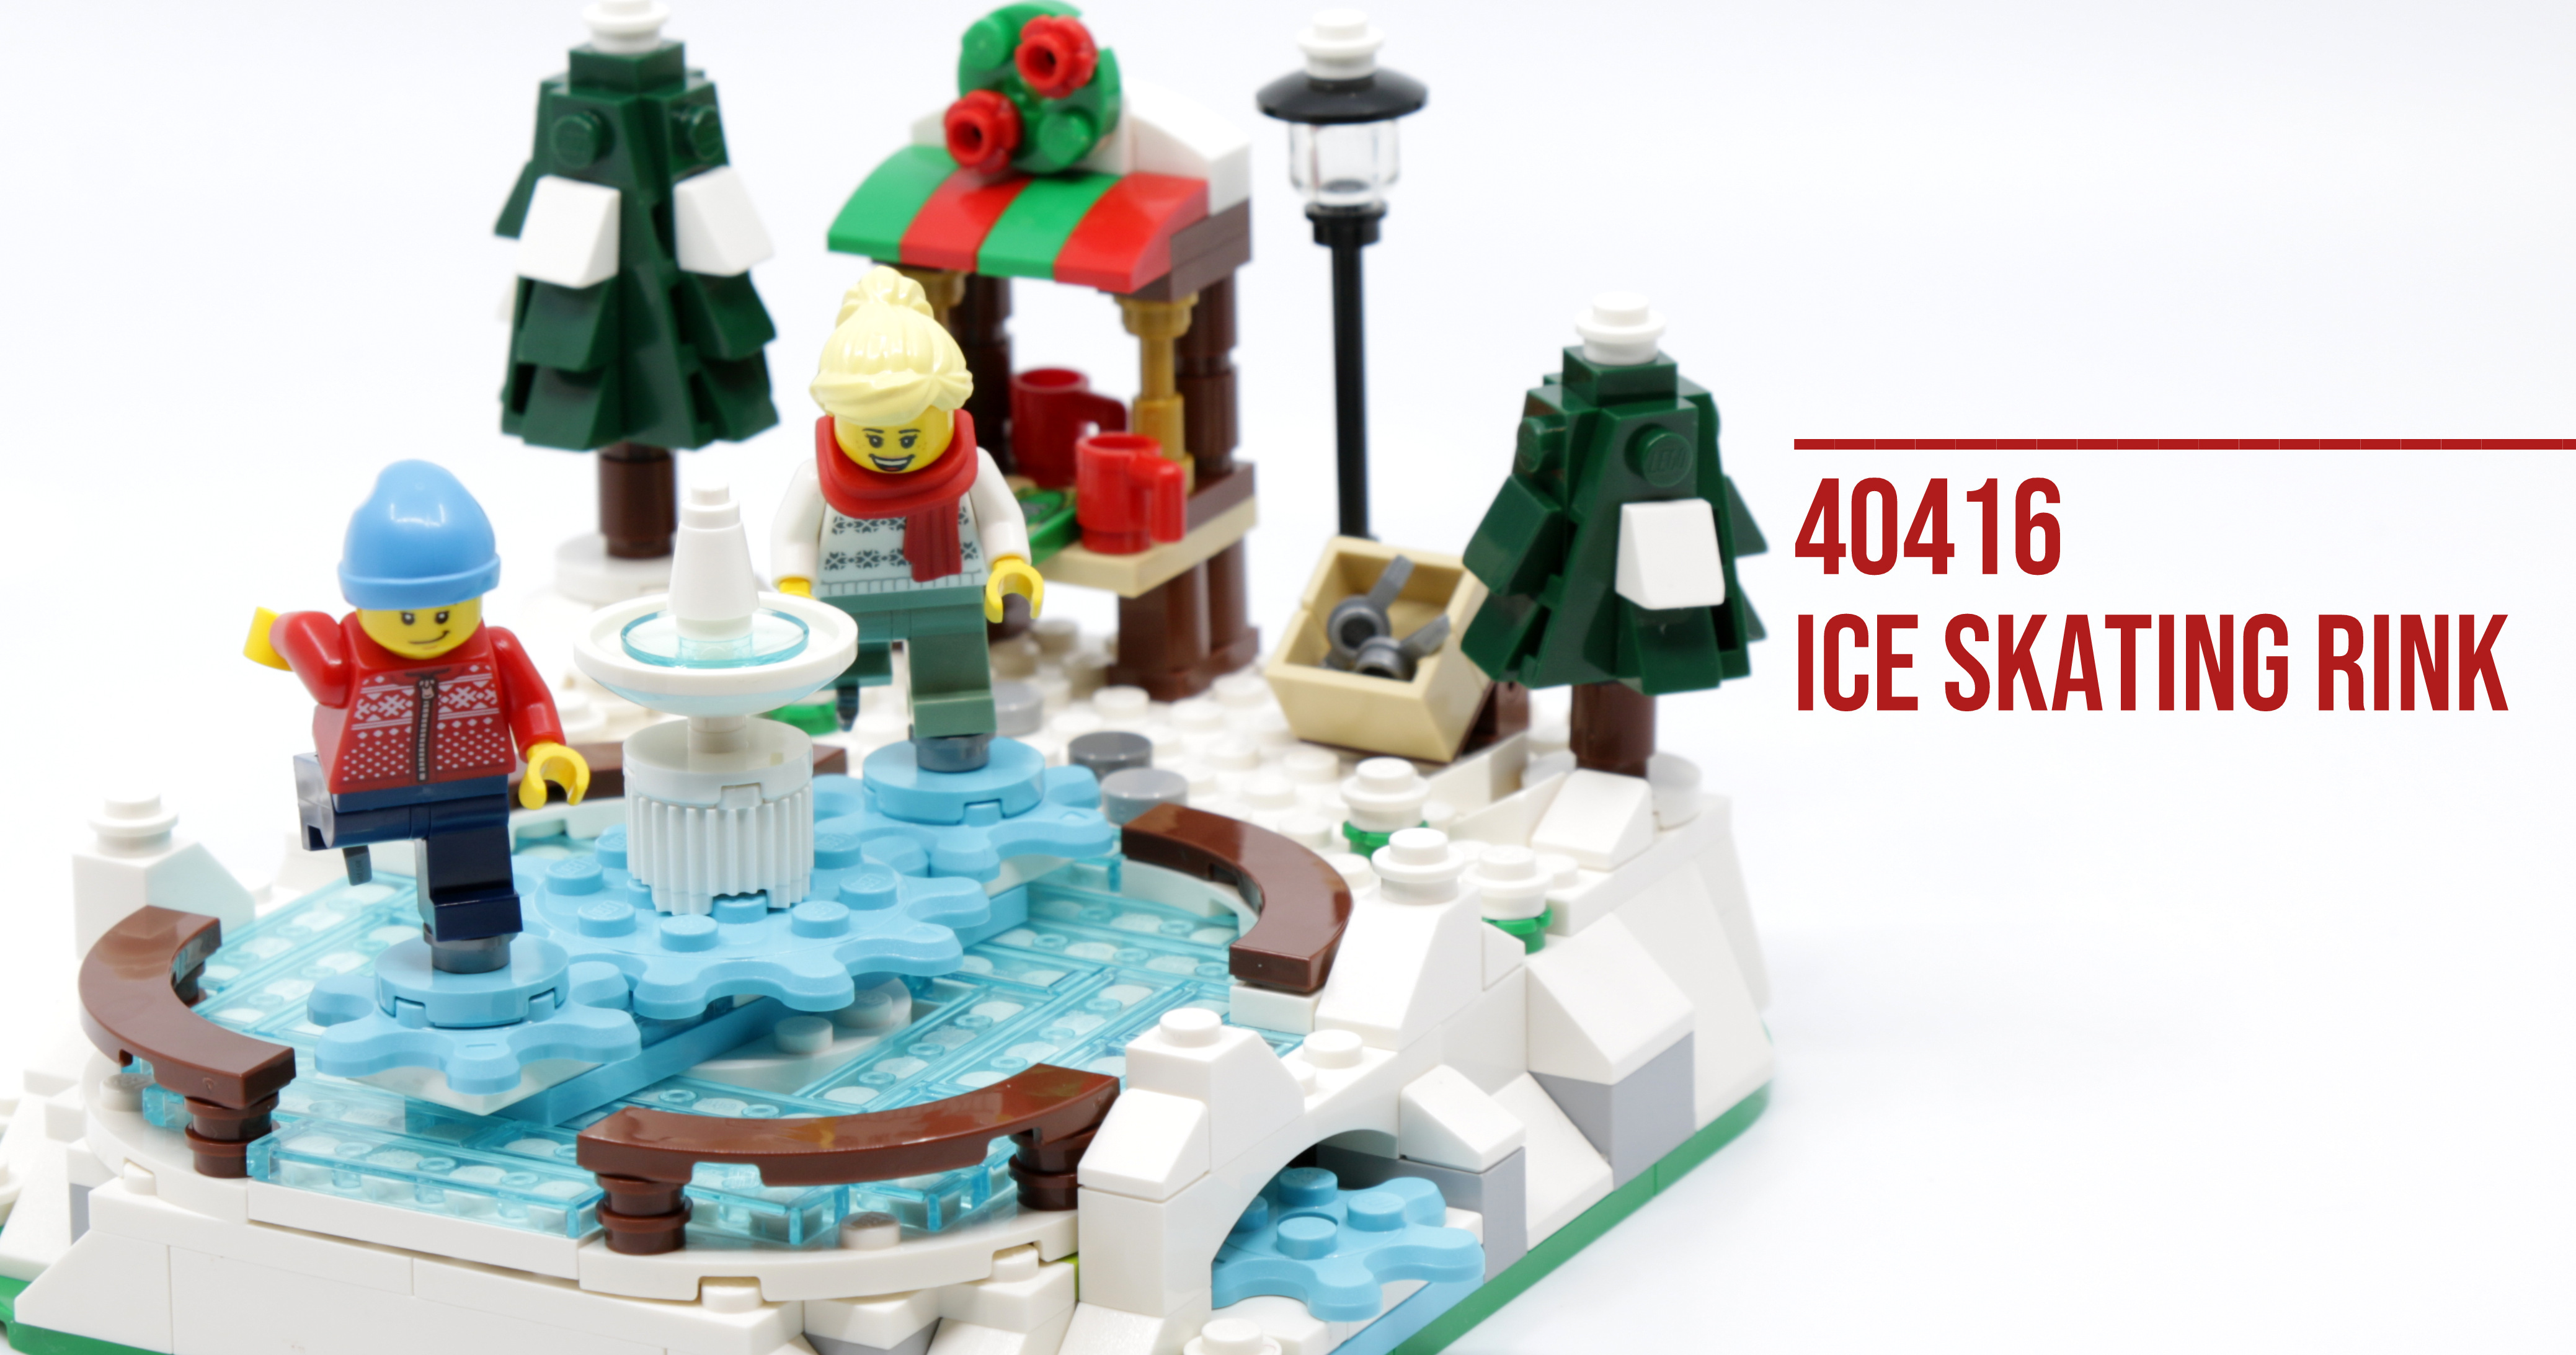 40416 for sale online 304 Pieces LEGO Ice Skating Rink Set 